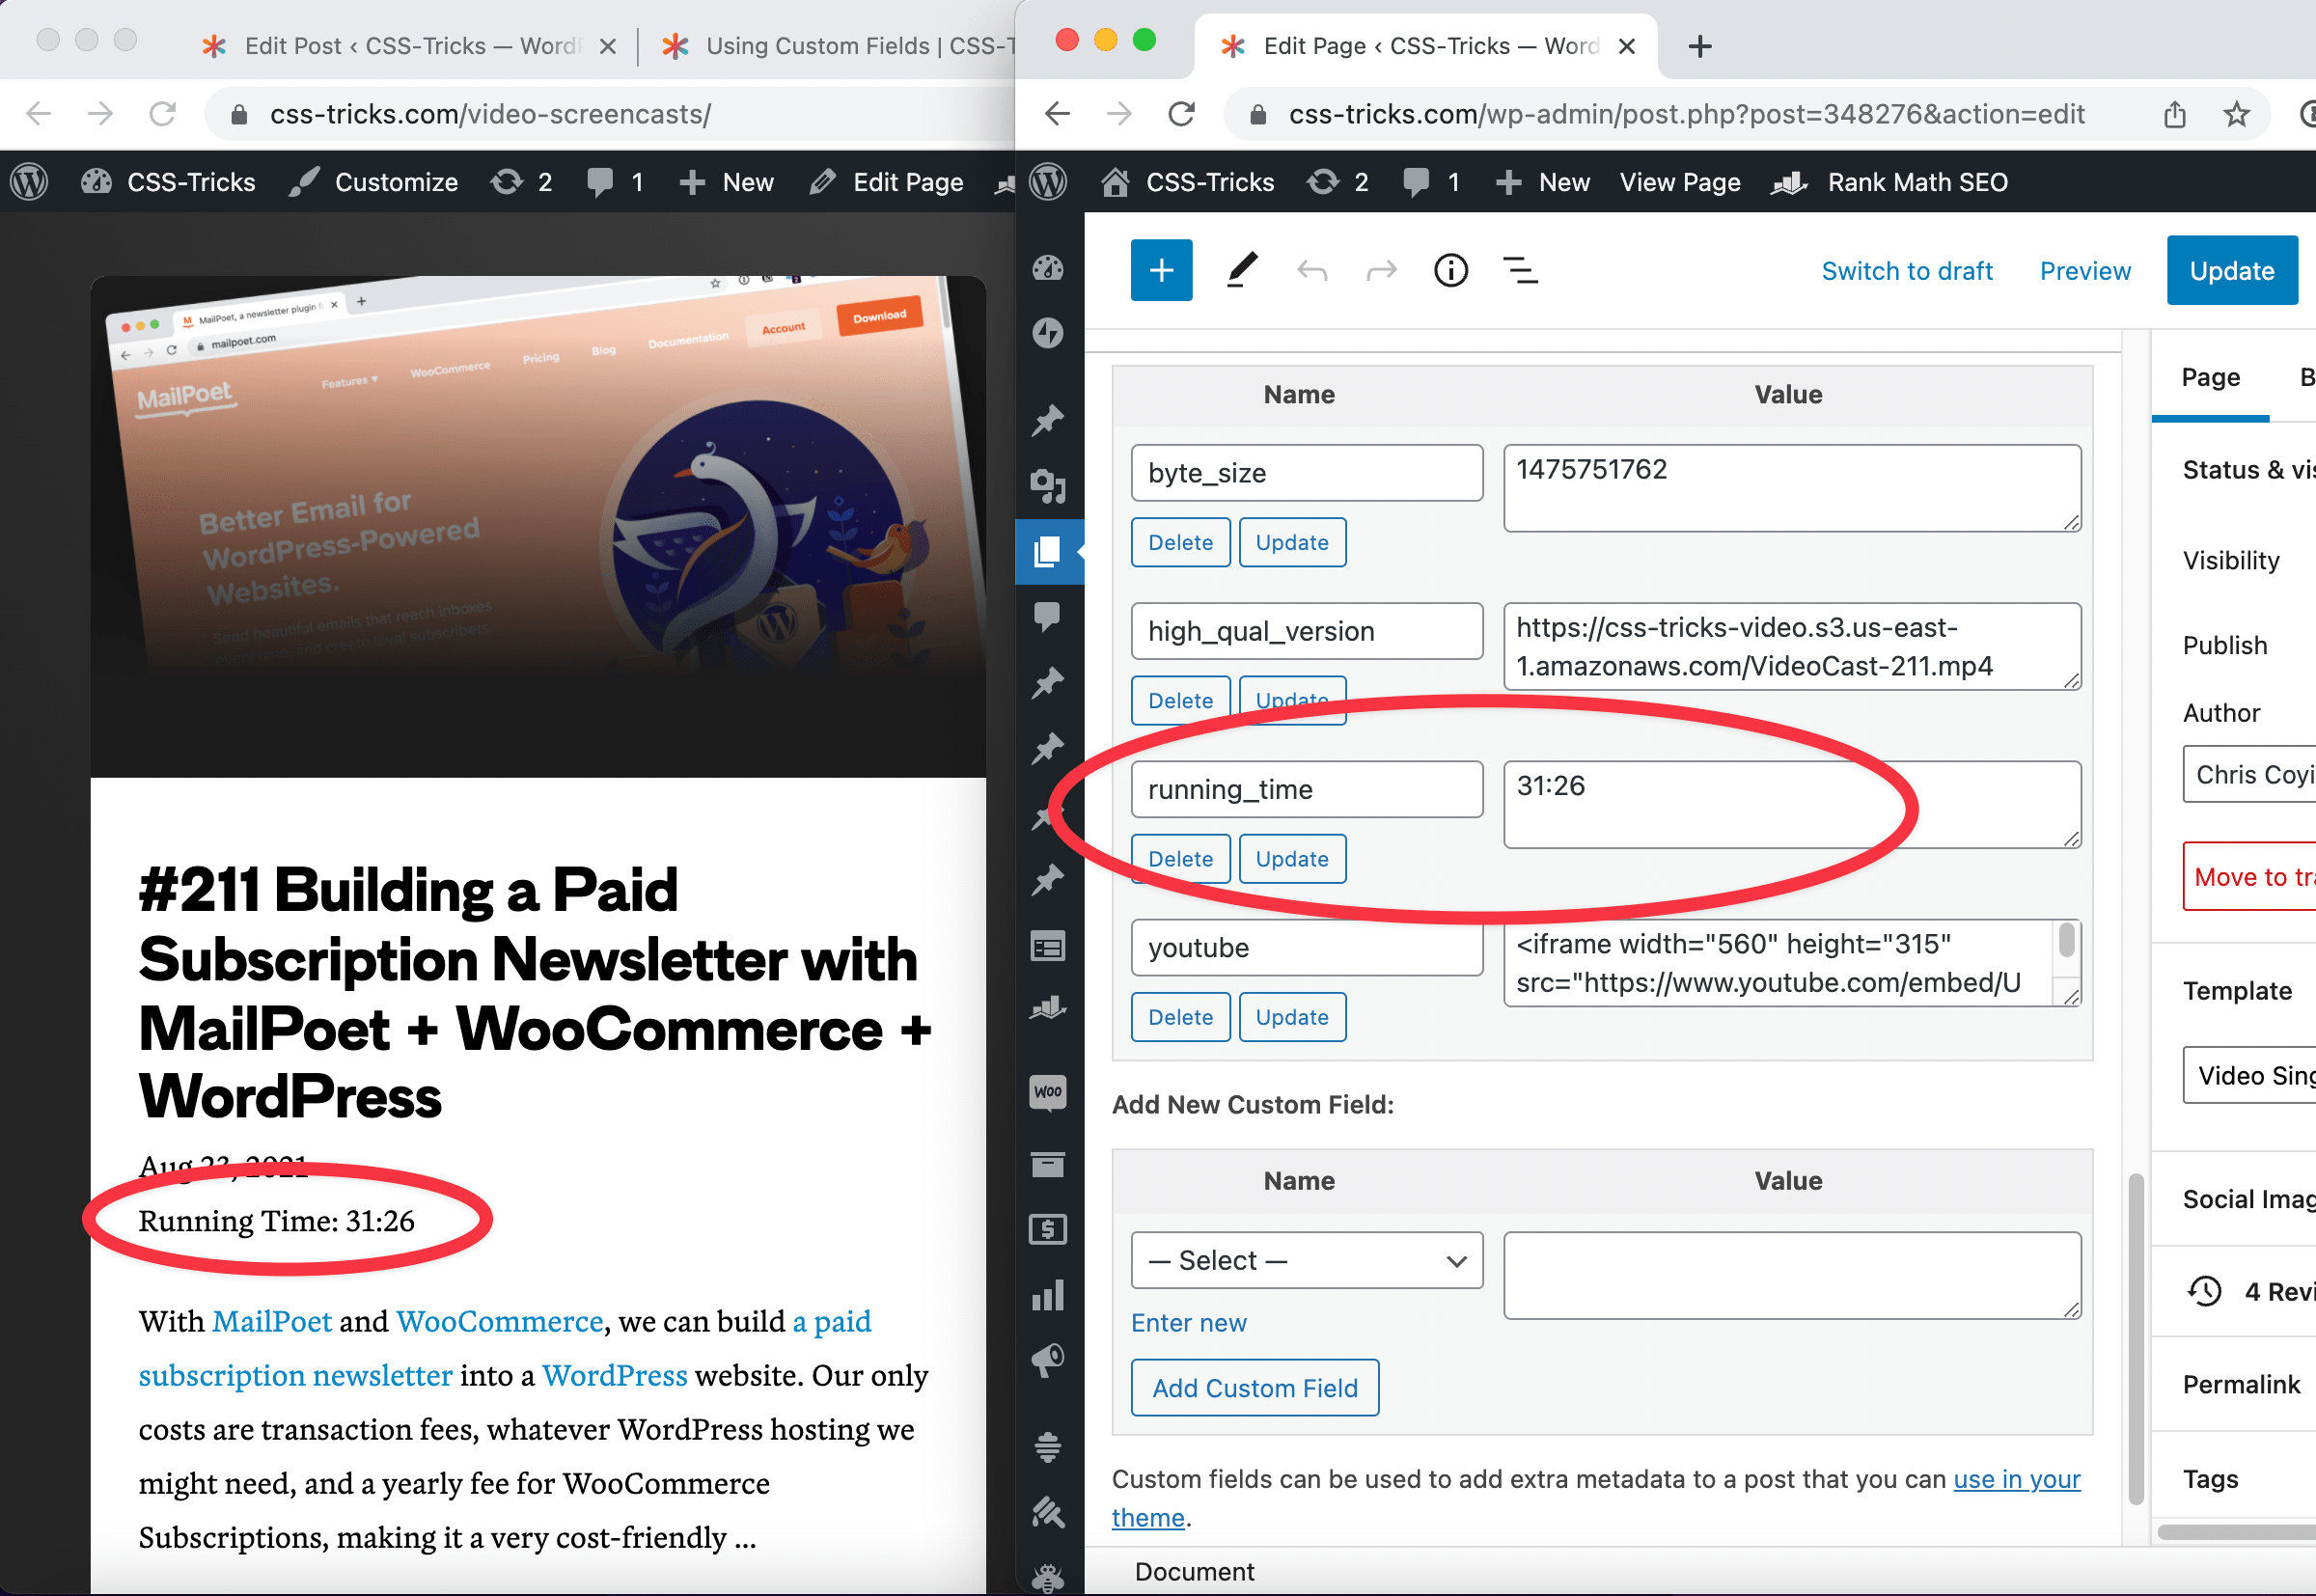 A side-by-side showing a published post on the left with the running time of a video circled in red, and the WordPress admin on the right with the running time custom field circled in the block editor showing the exact same information that is published in the post.